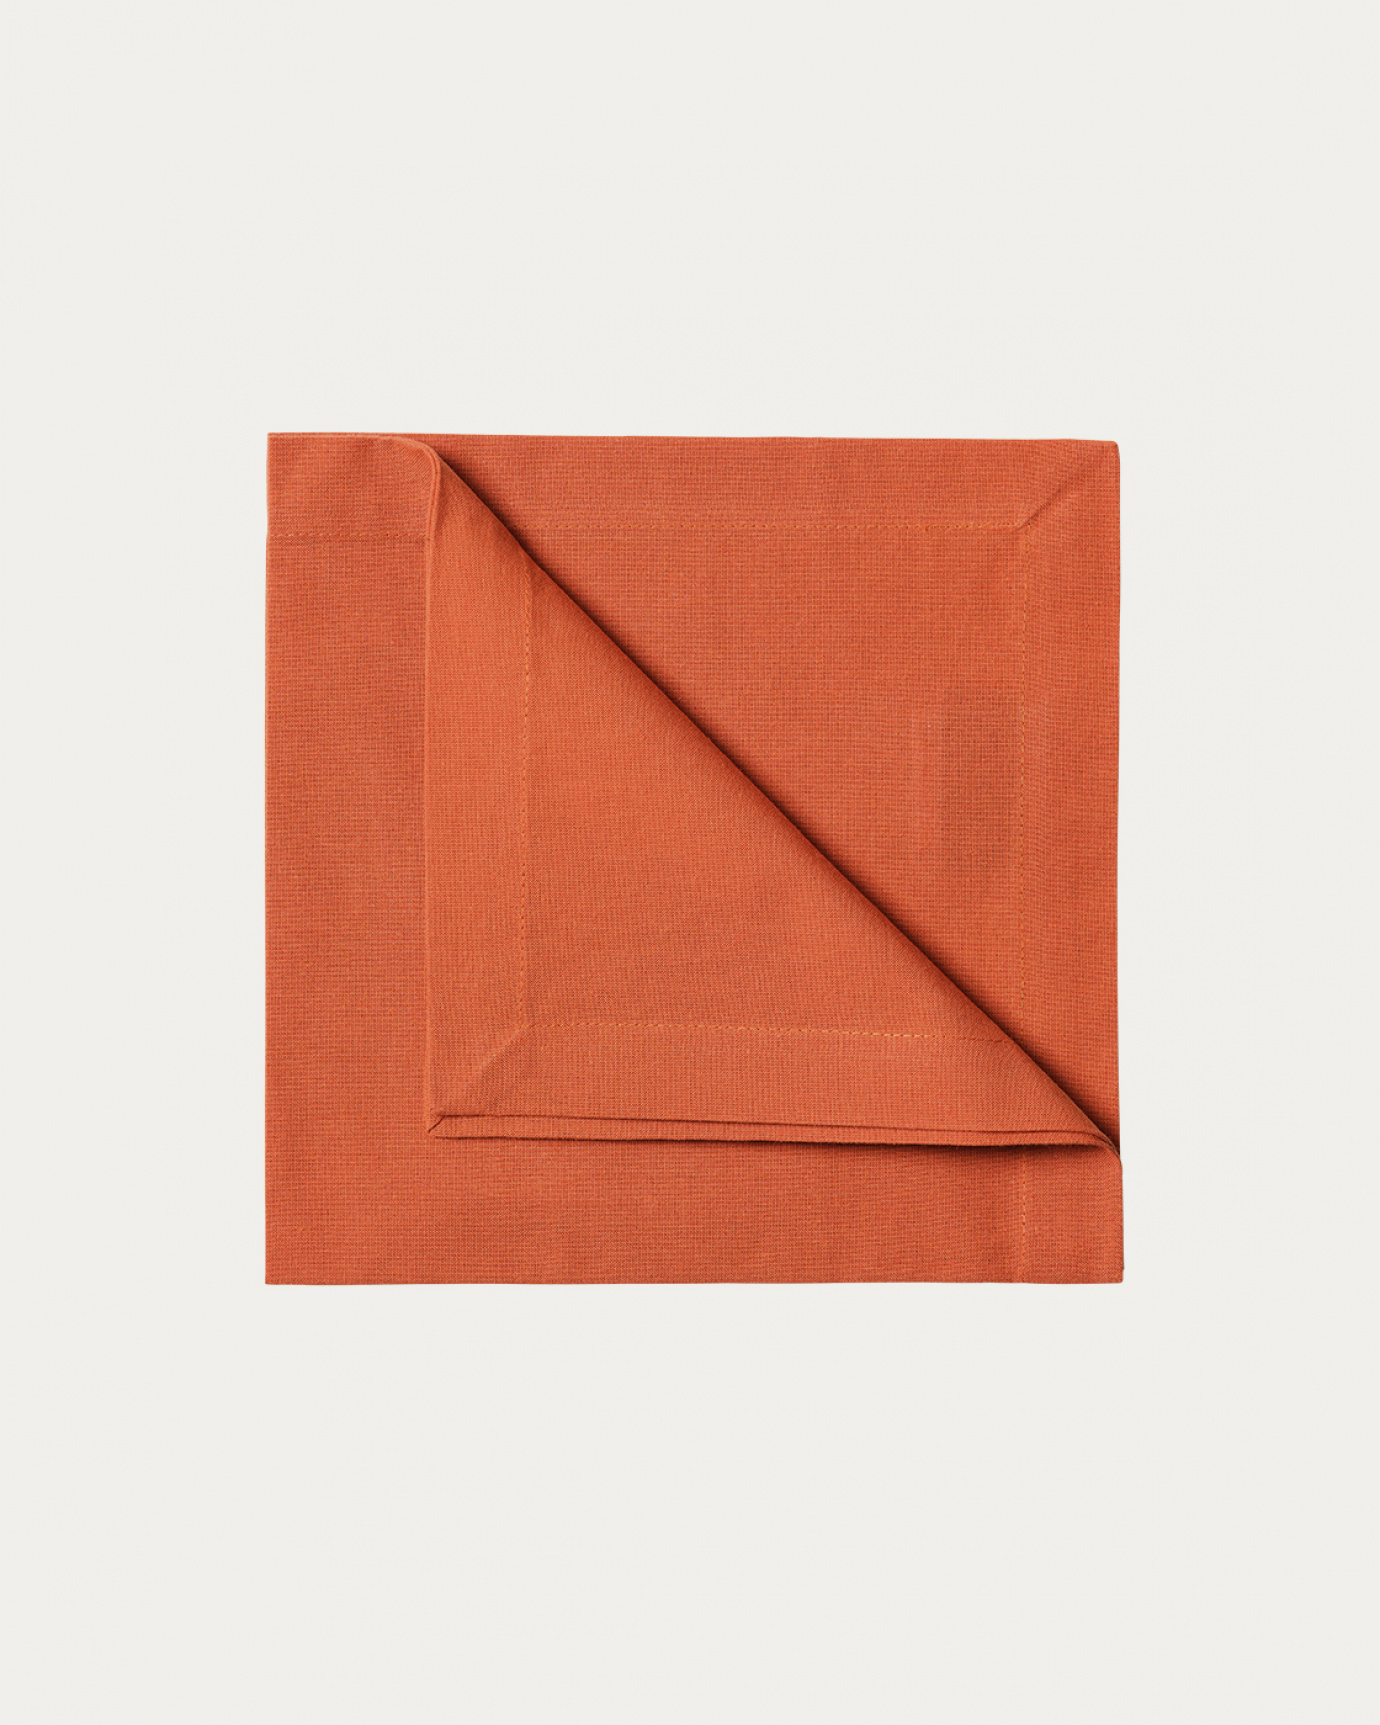 Product image rusty orange ROBERT napkin made of soft cotton from LINUM DESIGN. Size 45x45 cm and sold in 4-pack.